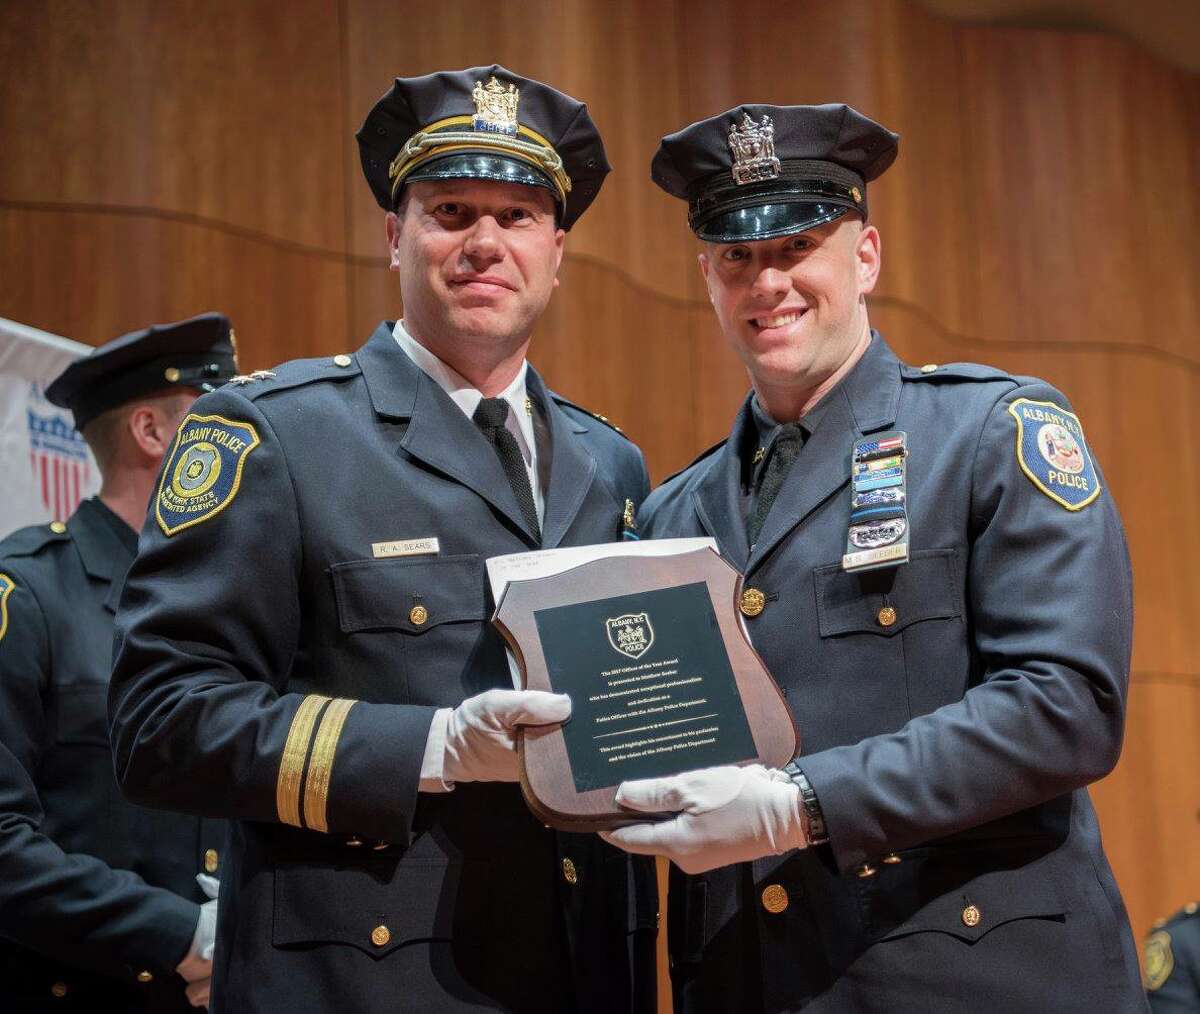 Matthew Seeber, right, receives the Officer of the Year Award from the Albany Police Department on May 15, 2018.